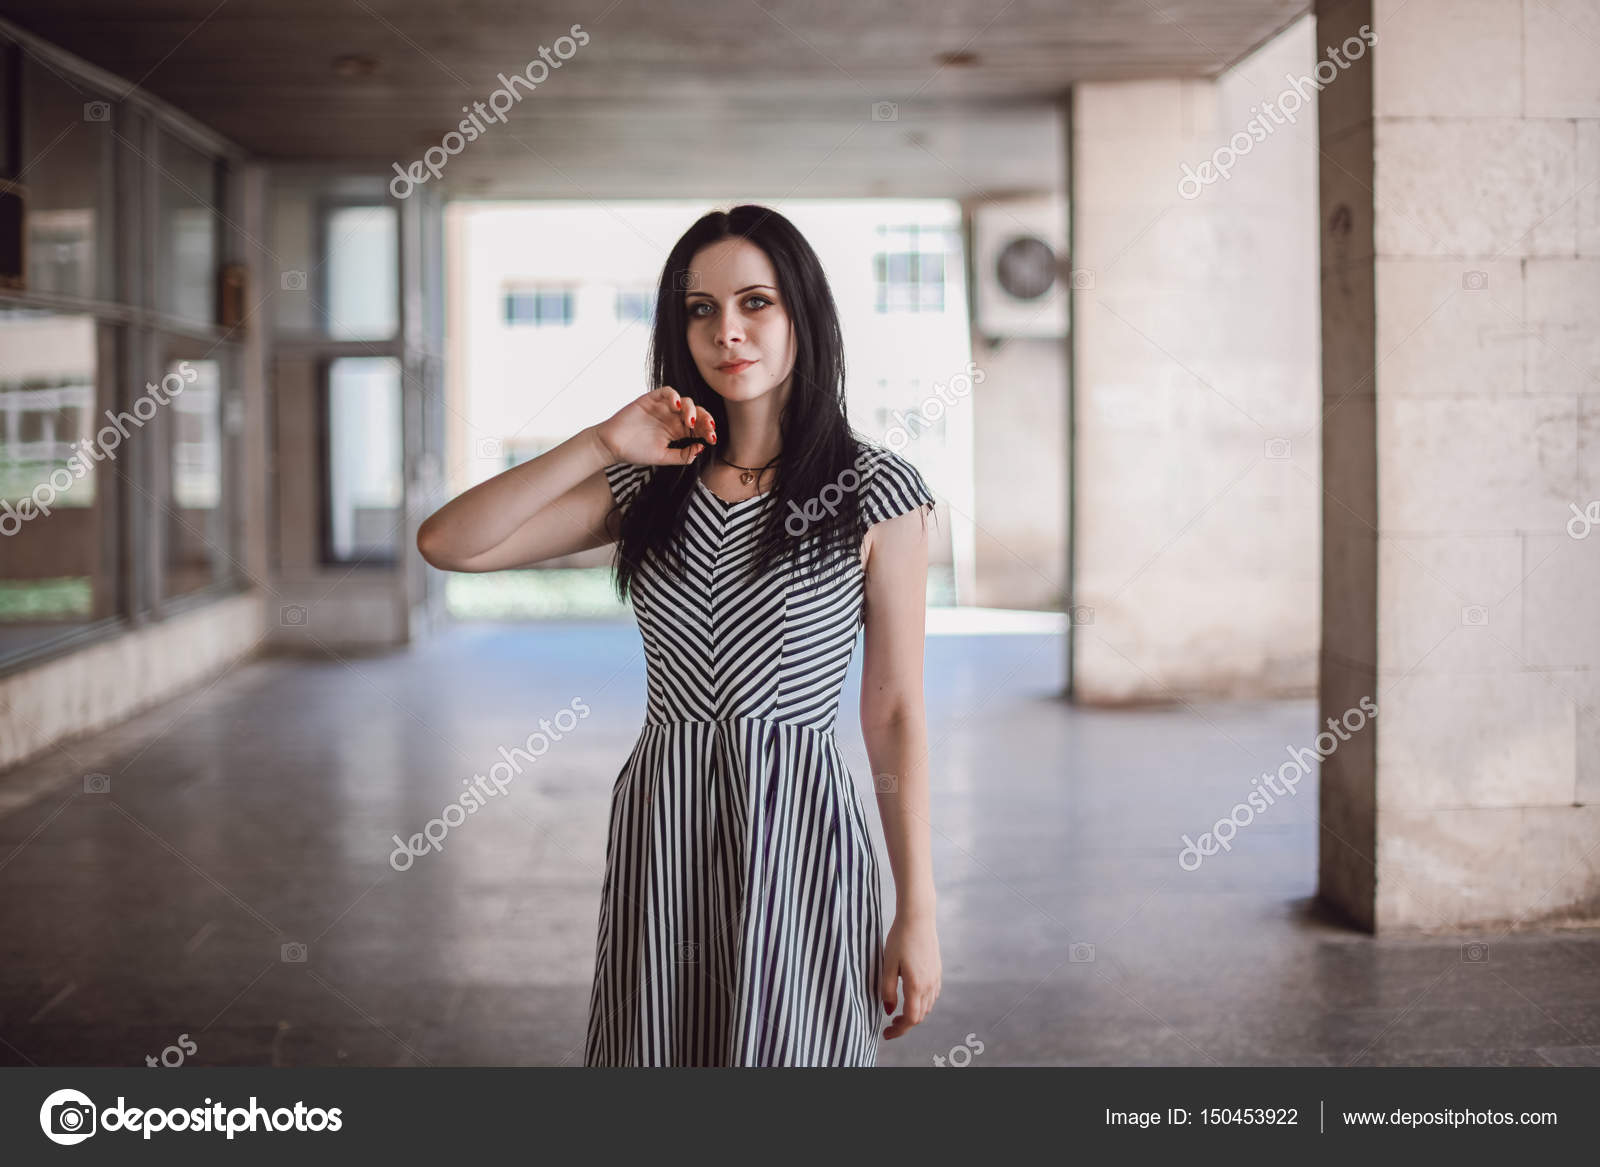 Young Skinny Tall Woman Posing In Short Dress With Stripes